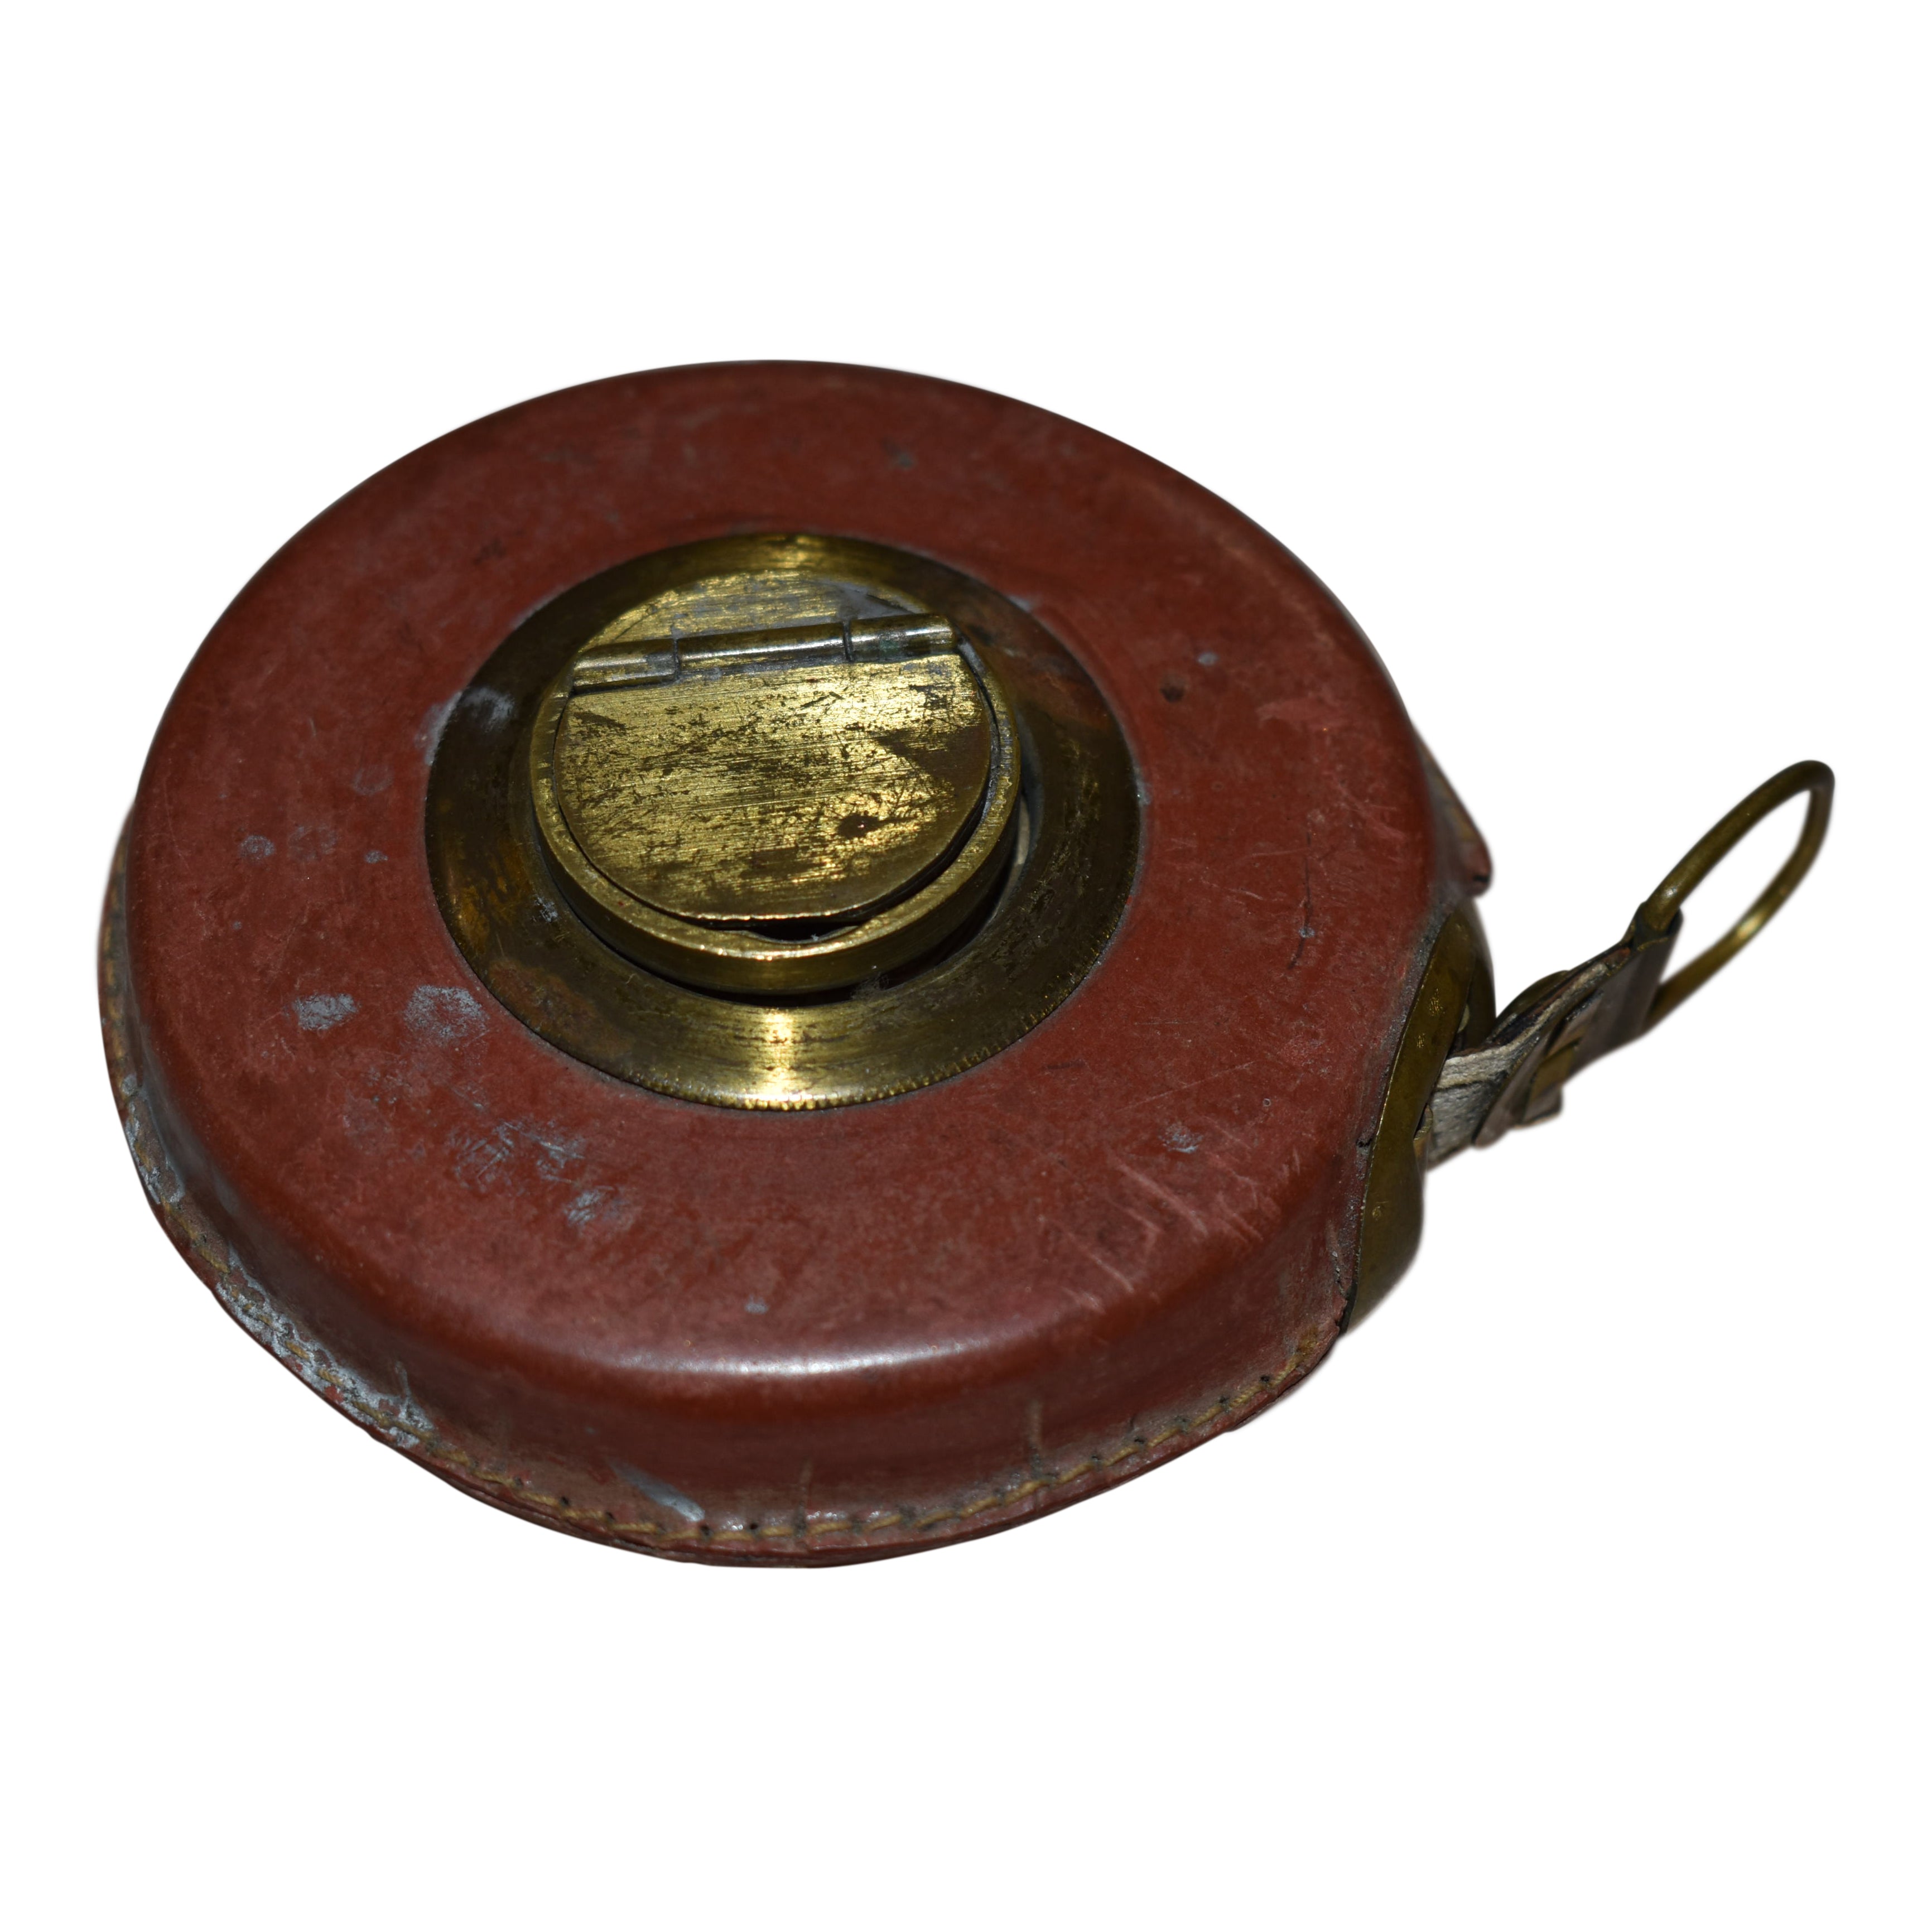 Metric Tape Measure in Leather Case